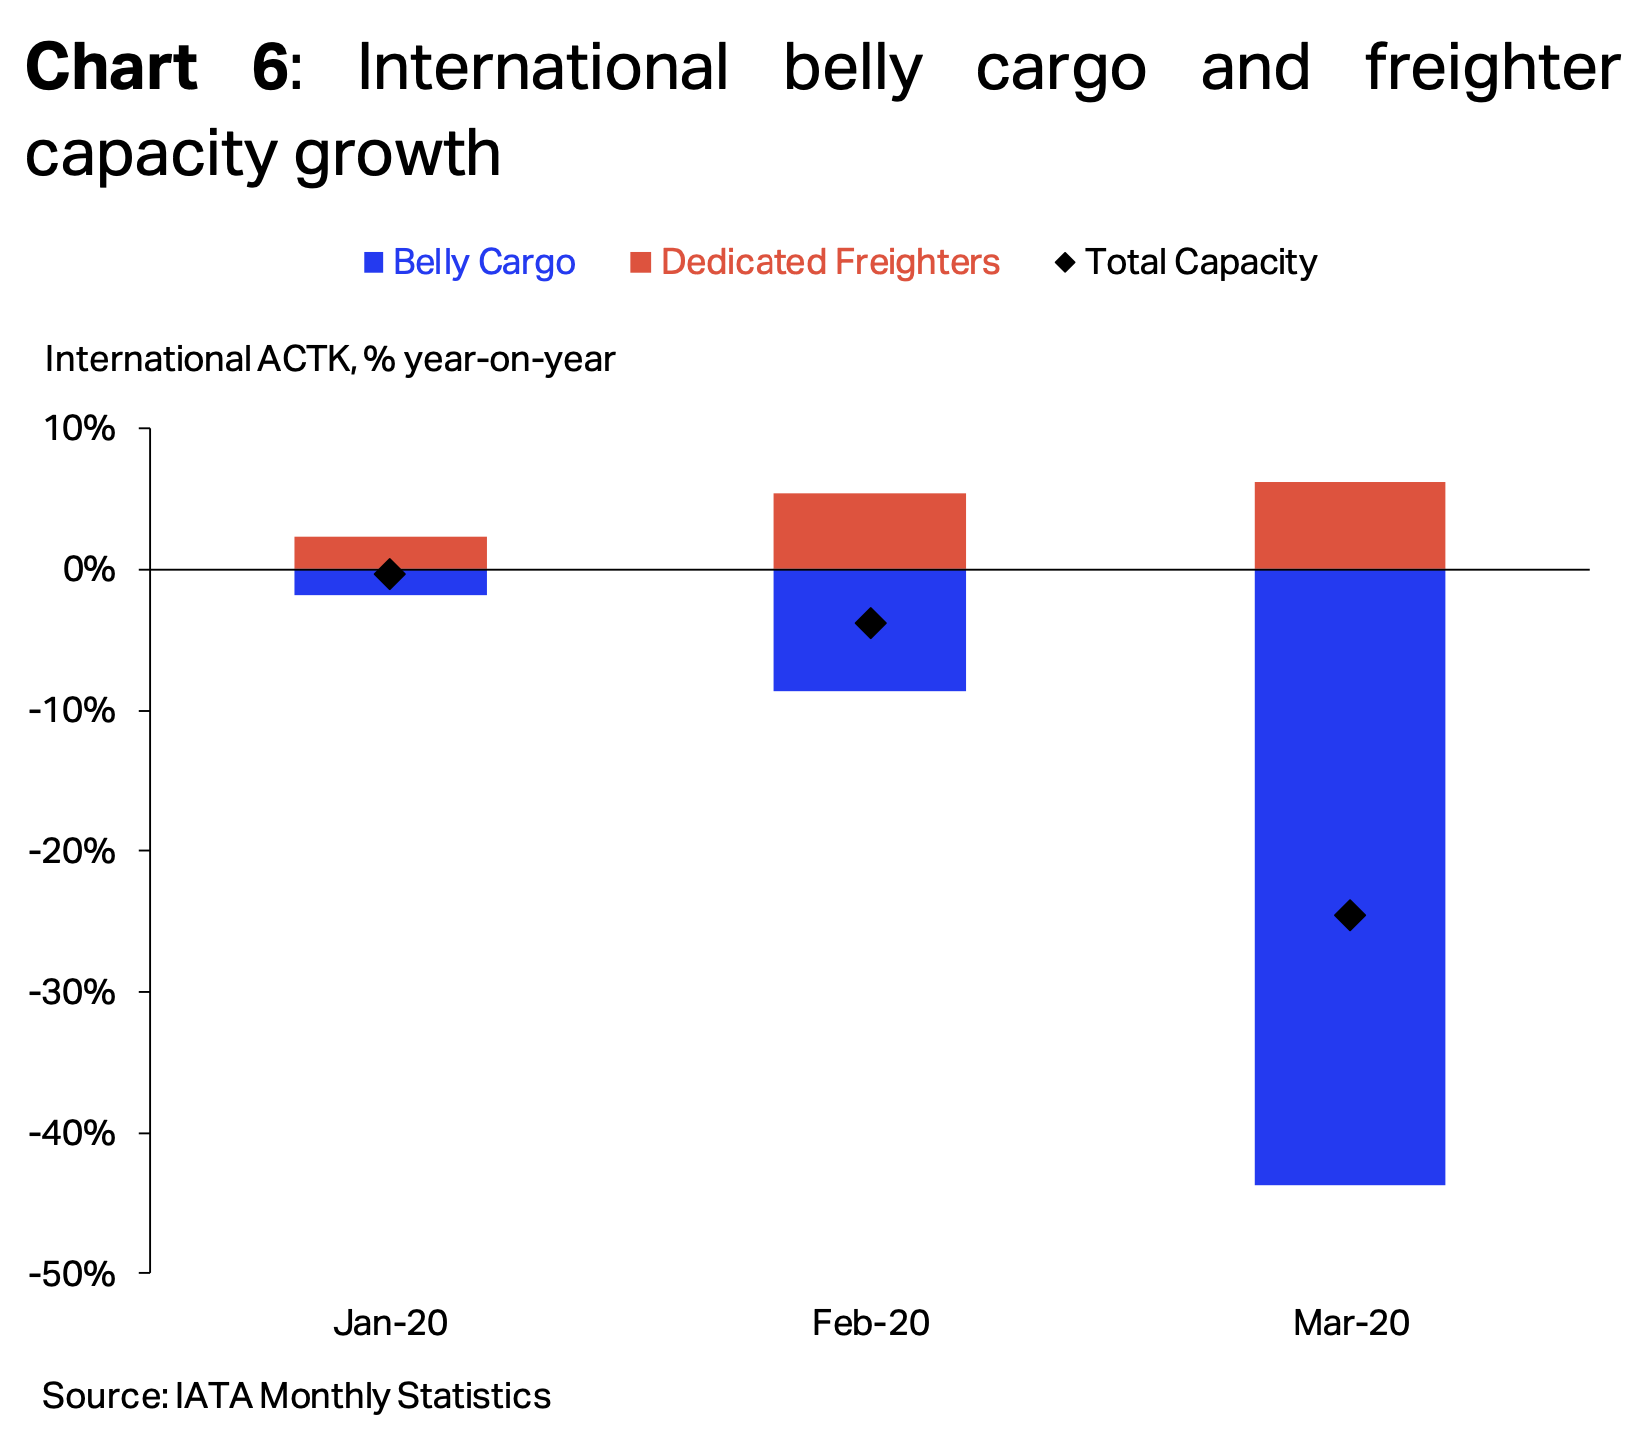 Iata: Air cargo plunges in March as COVID-19 spreads globally